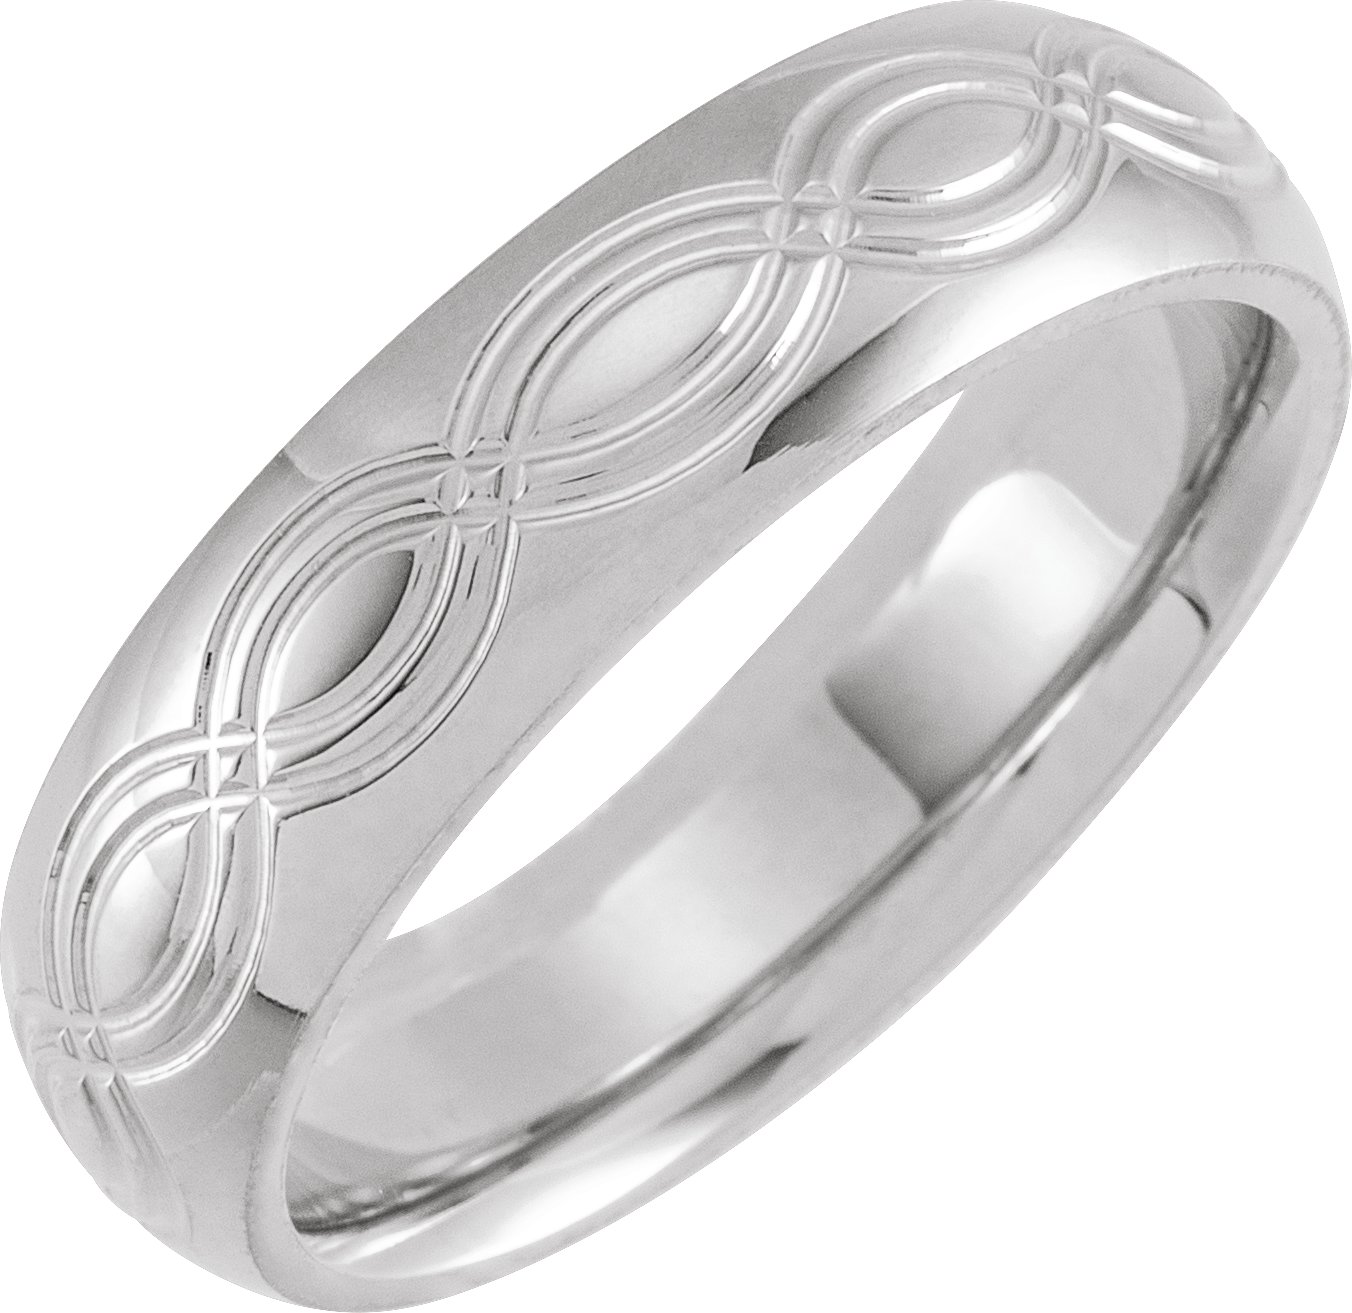 14K White 6 mm Infinity Patterned Band Size 10